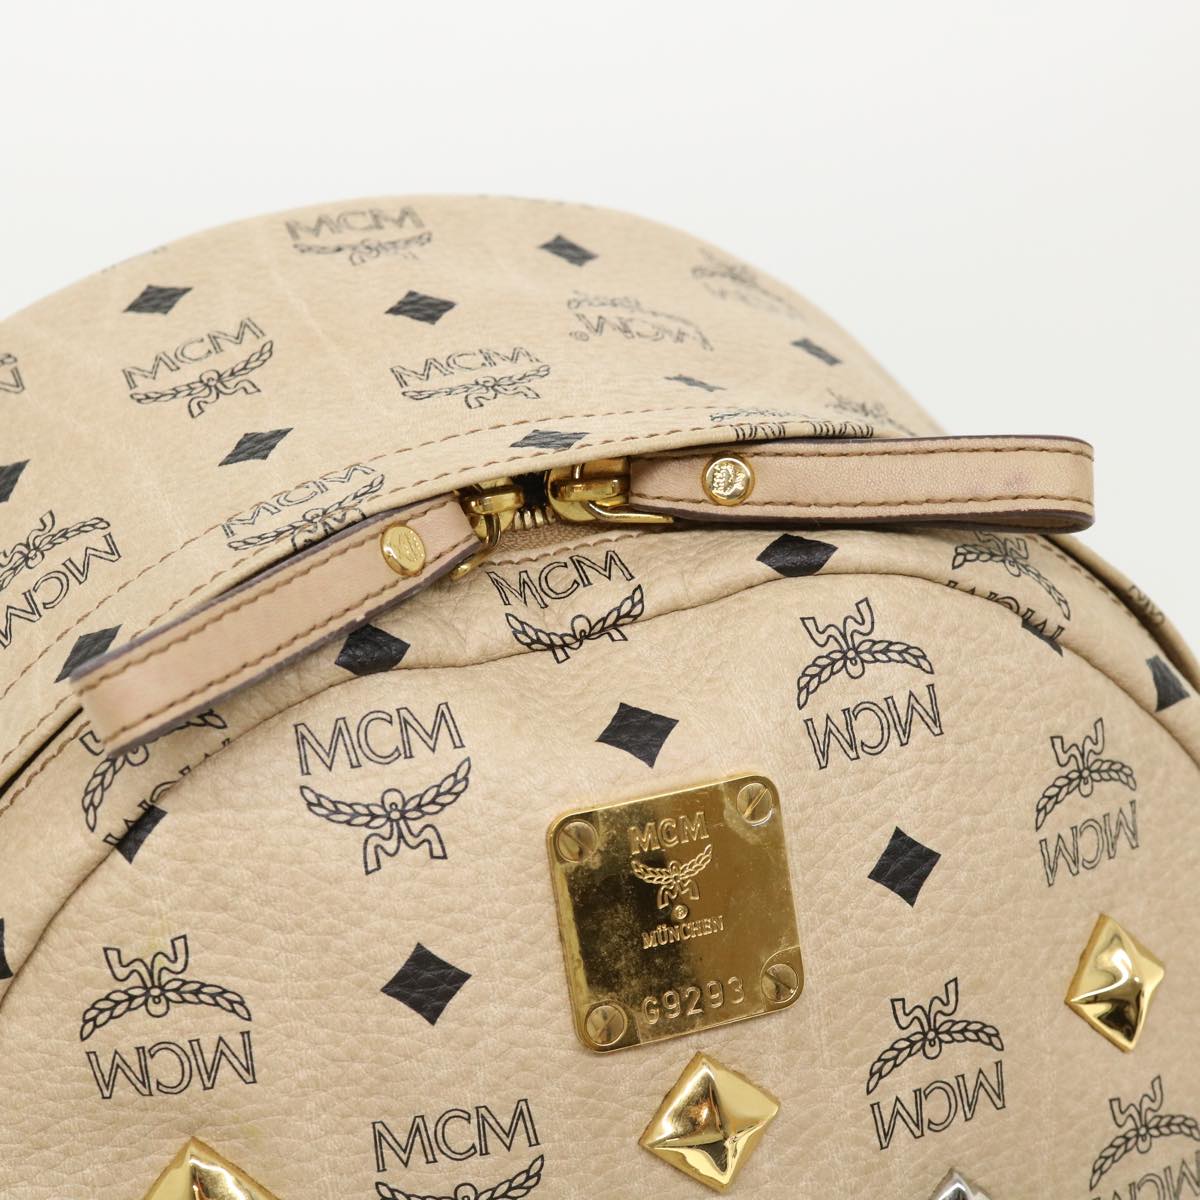 MCM Vicetos Logogram Backpack PVC Leather Beige Auth am3401